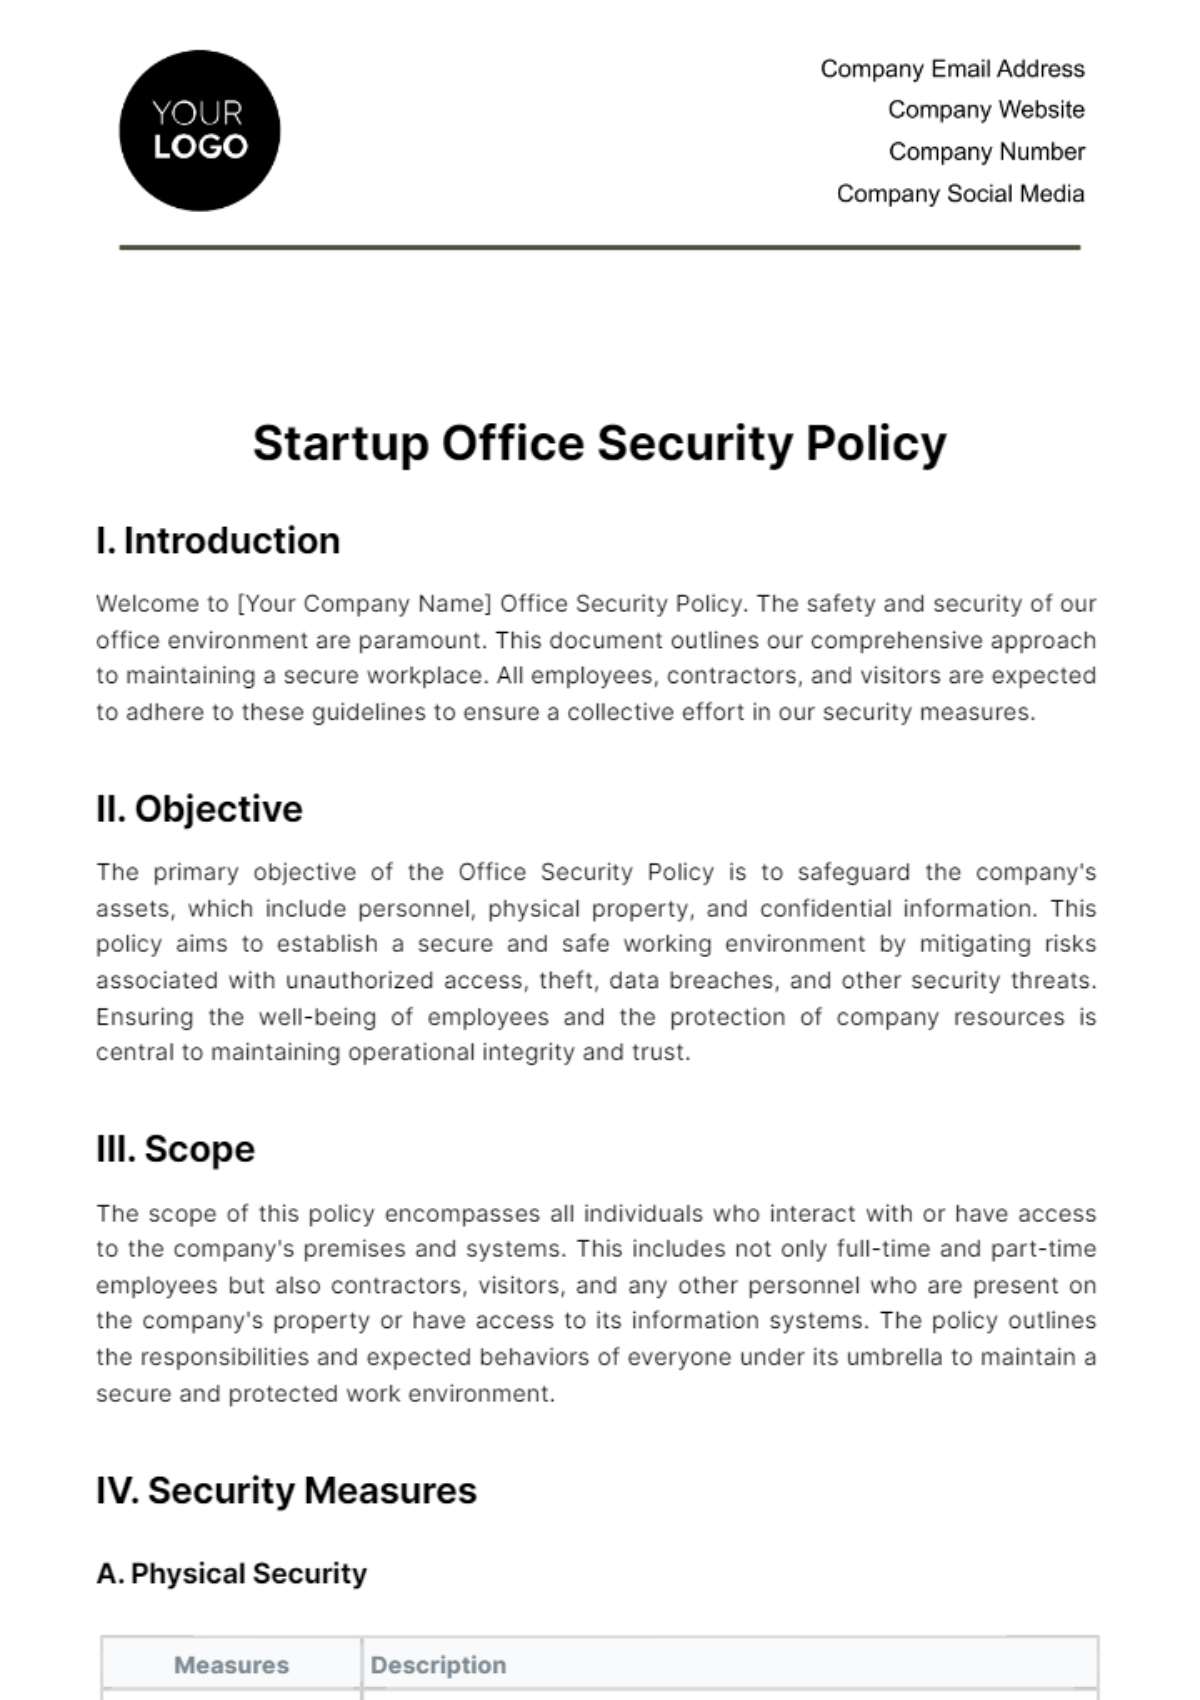 Free Startup Office Security Policy Template